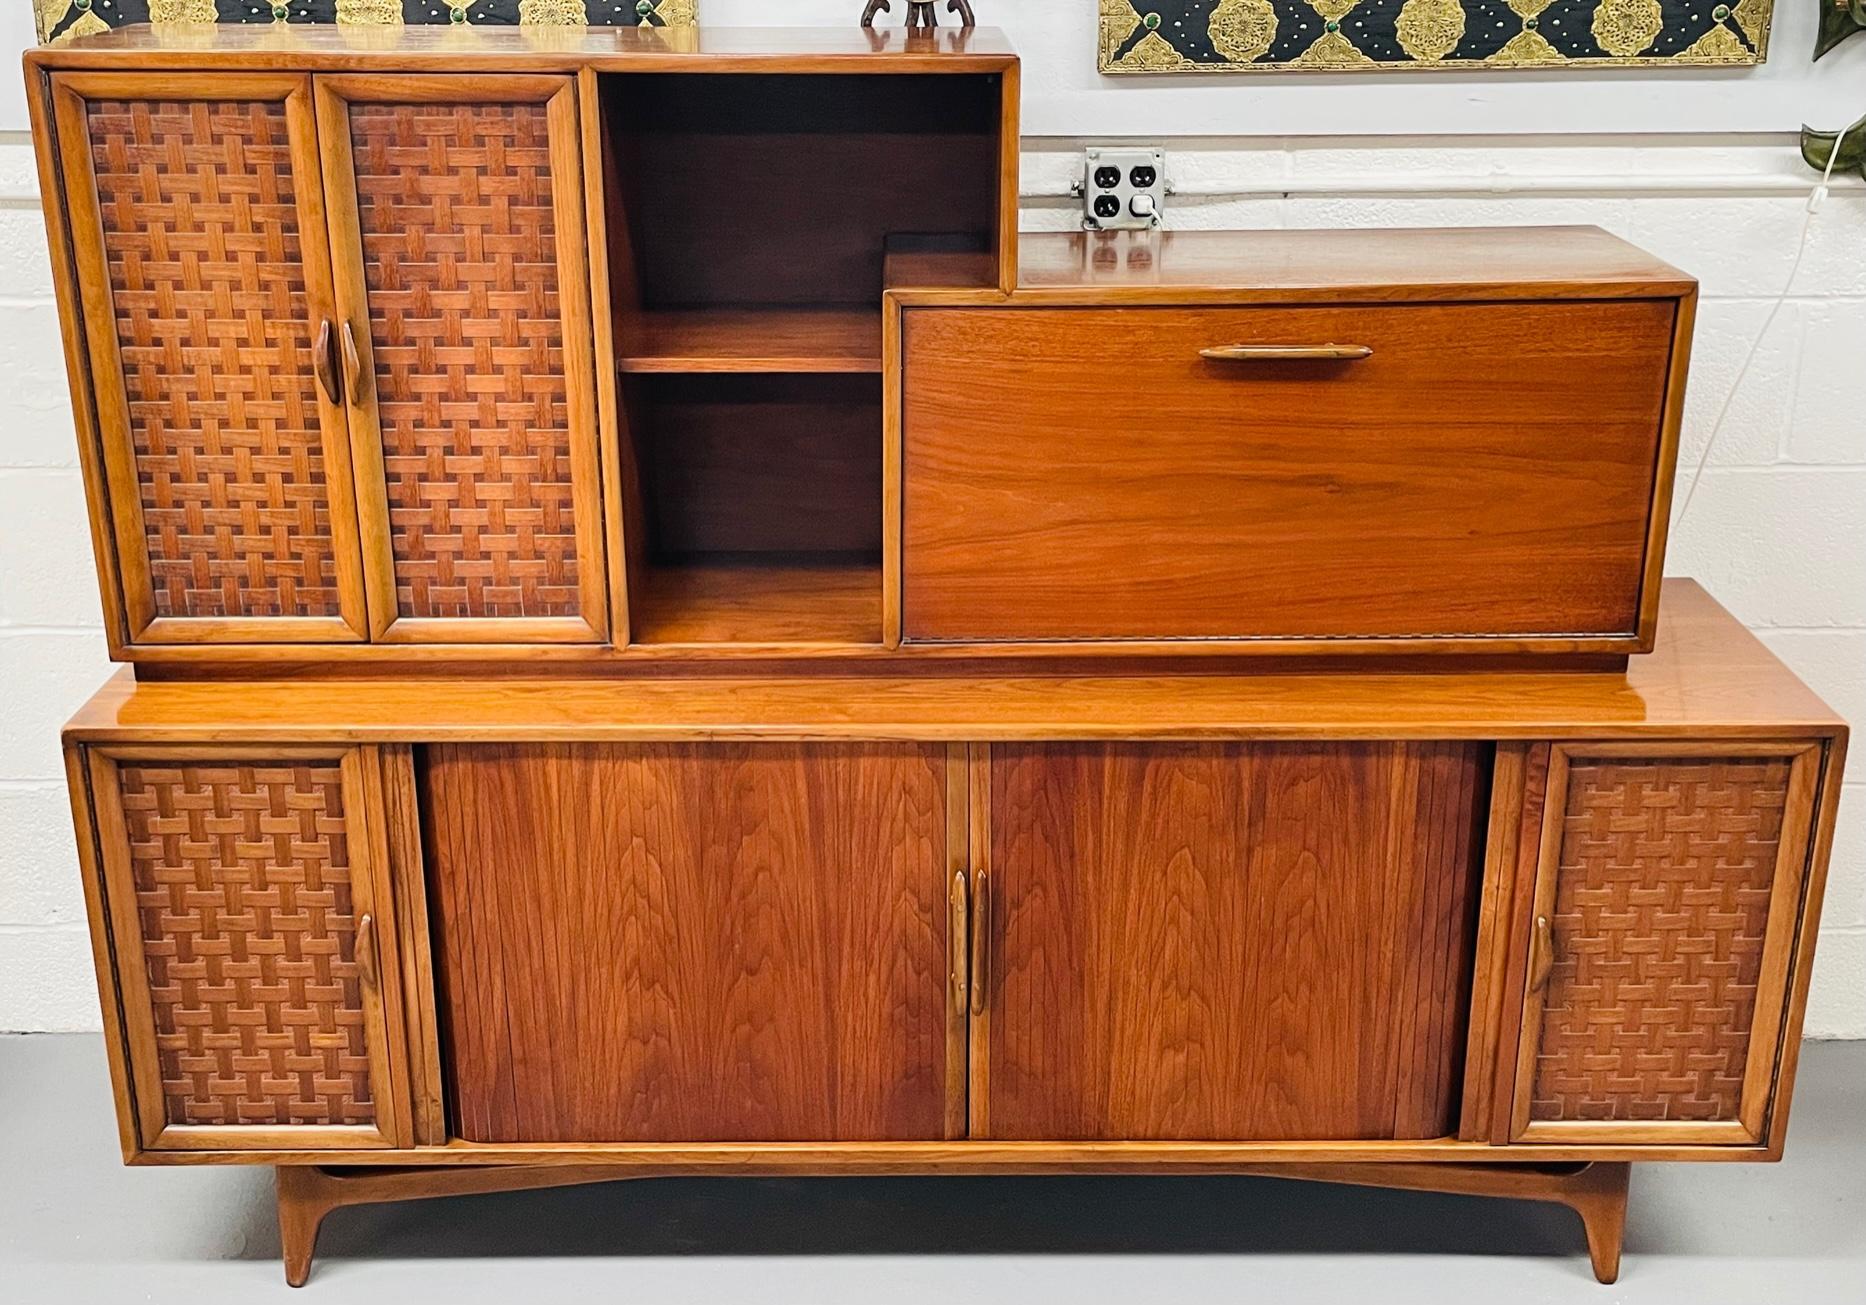 A stylish large Mid-Century Modern Danish teak sideboard, credenza, bar or cocktail cabinet featuring fine craftsmanship with plenty of storage room. The cabinet has two sections. The bottom section has a large two door cabinet with a record player